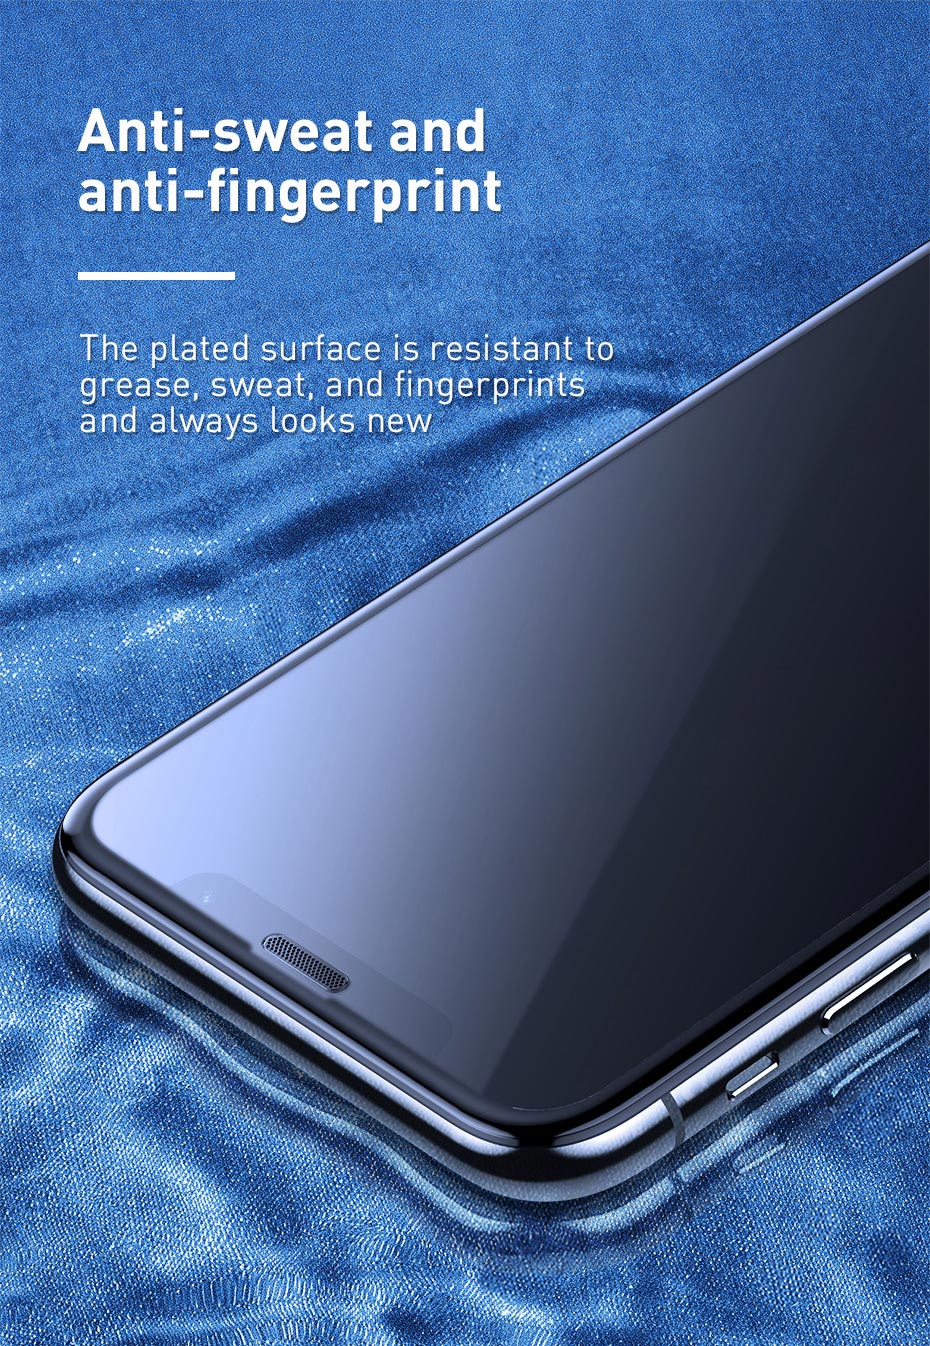 2PCS-Baseus-Anti-peeping-Dustproof-Curved-Edge-Tempered-Glass-Screen-Protector-For-iPhone-XiPhone-XS-1586653-11